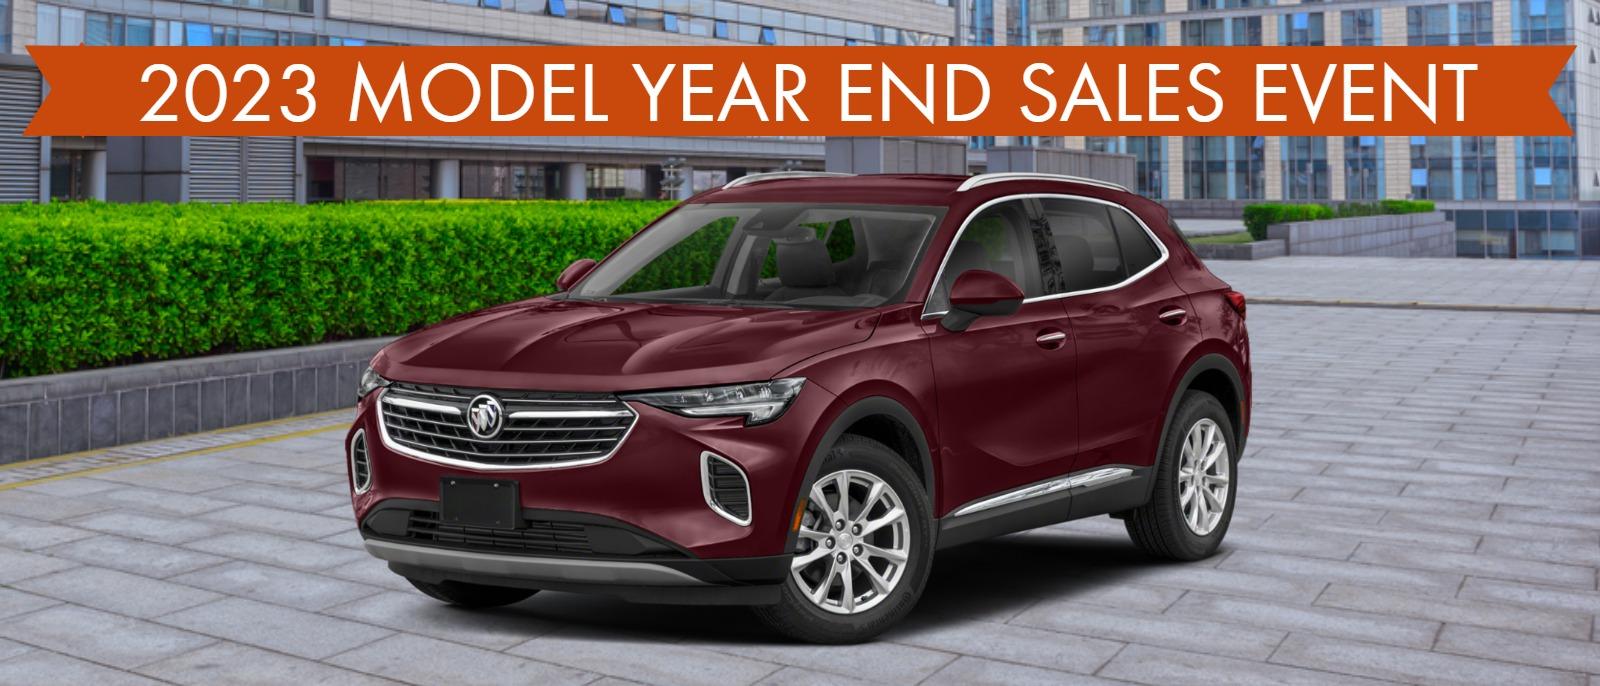 2023 Model Year and Sales event